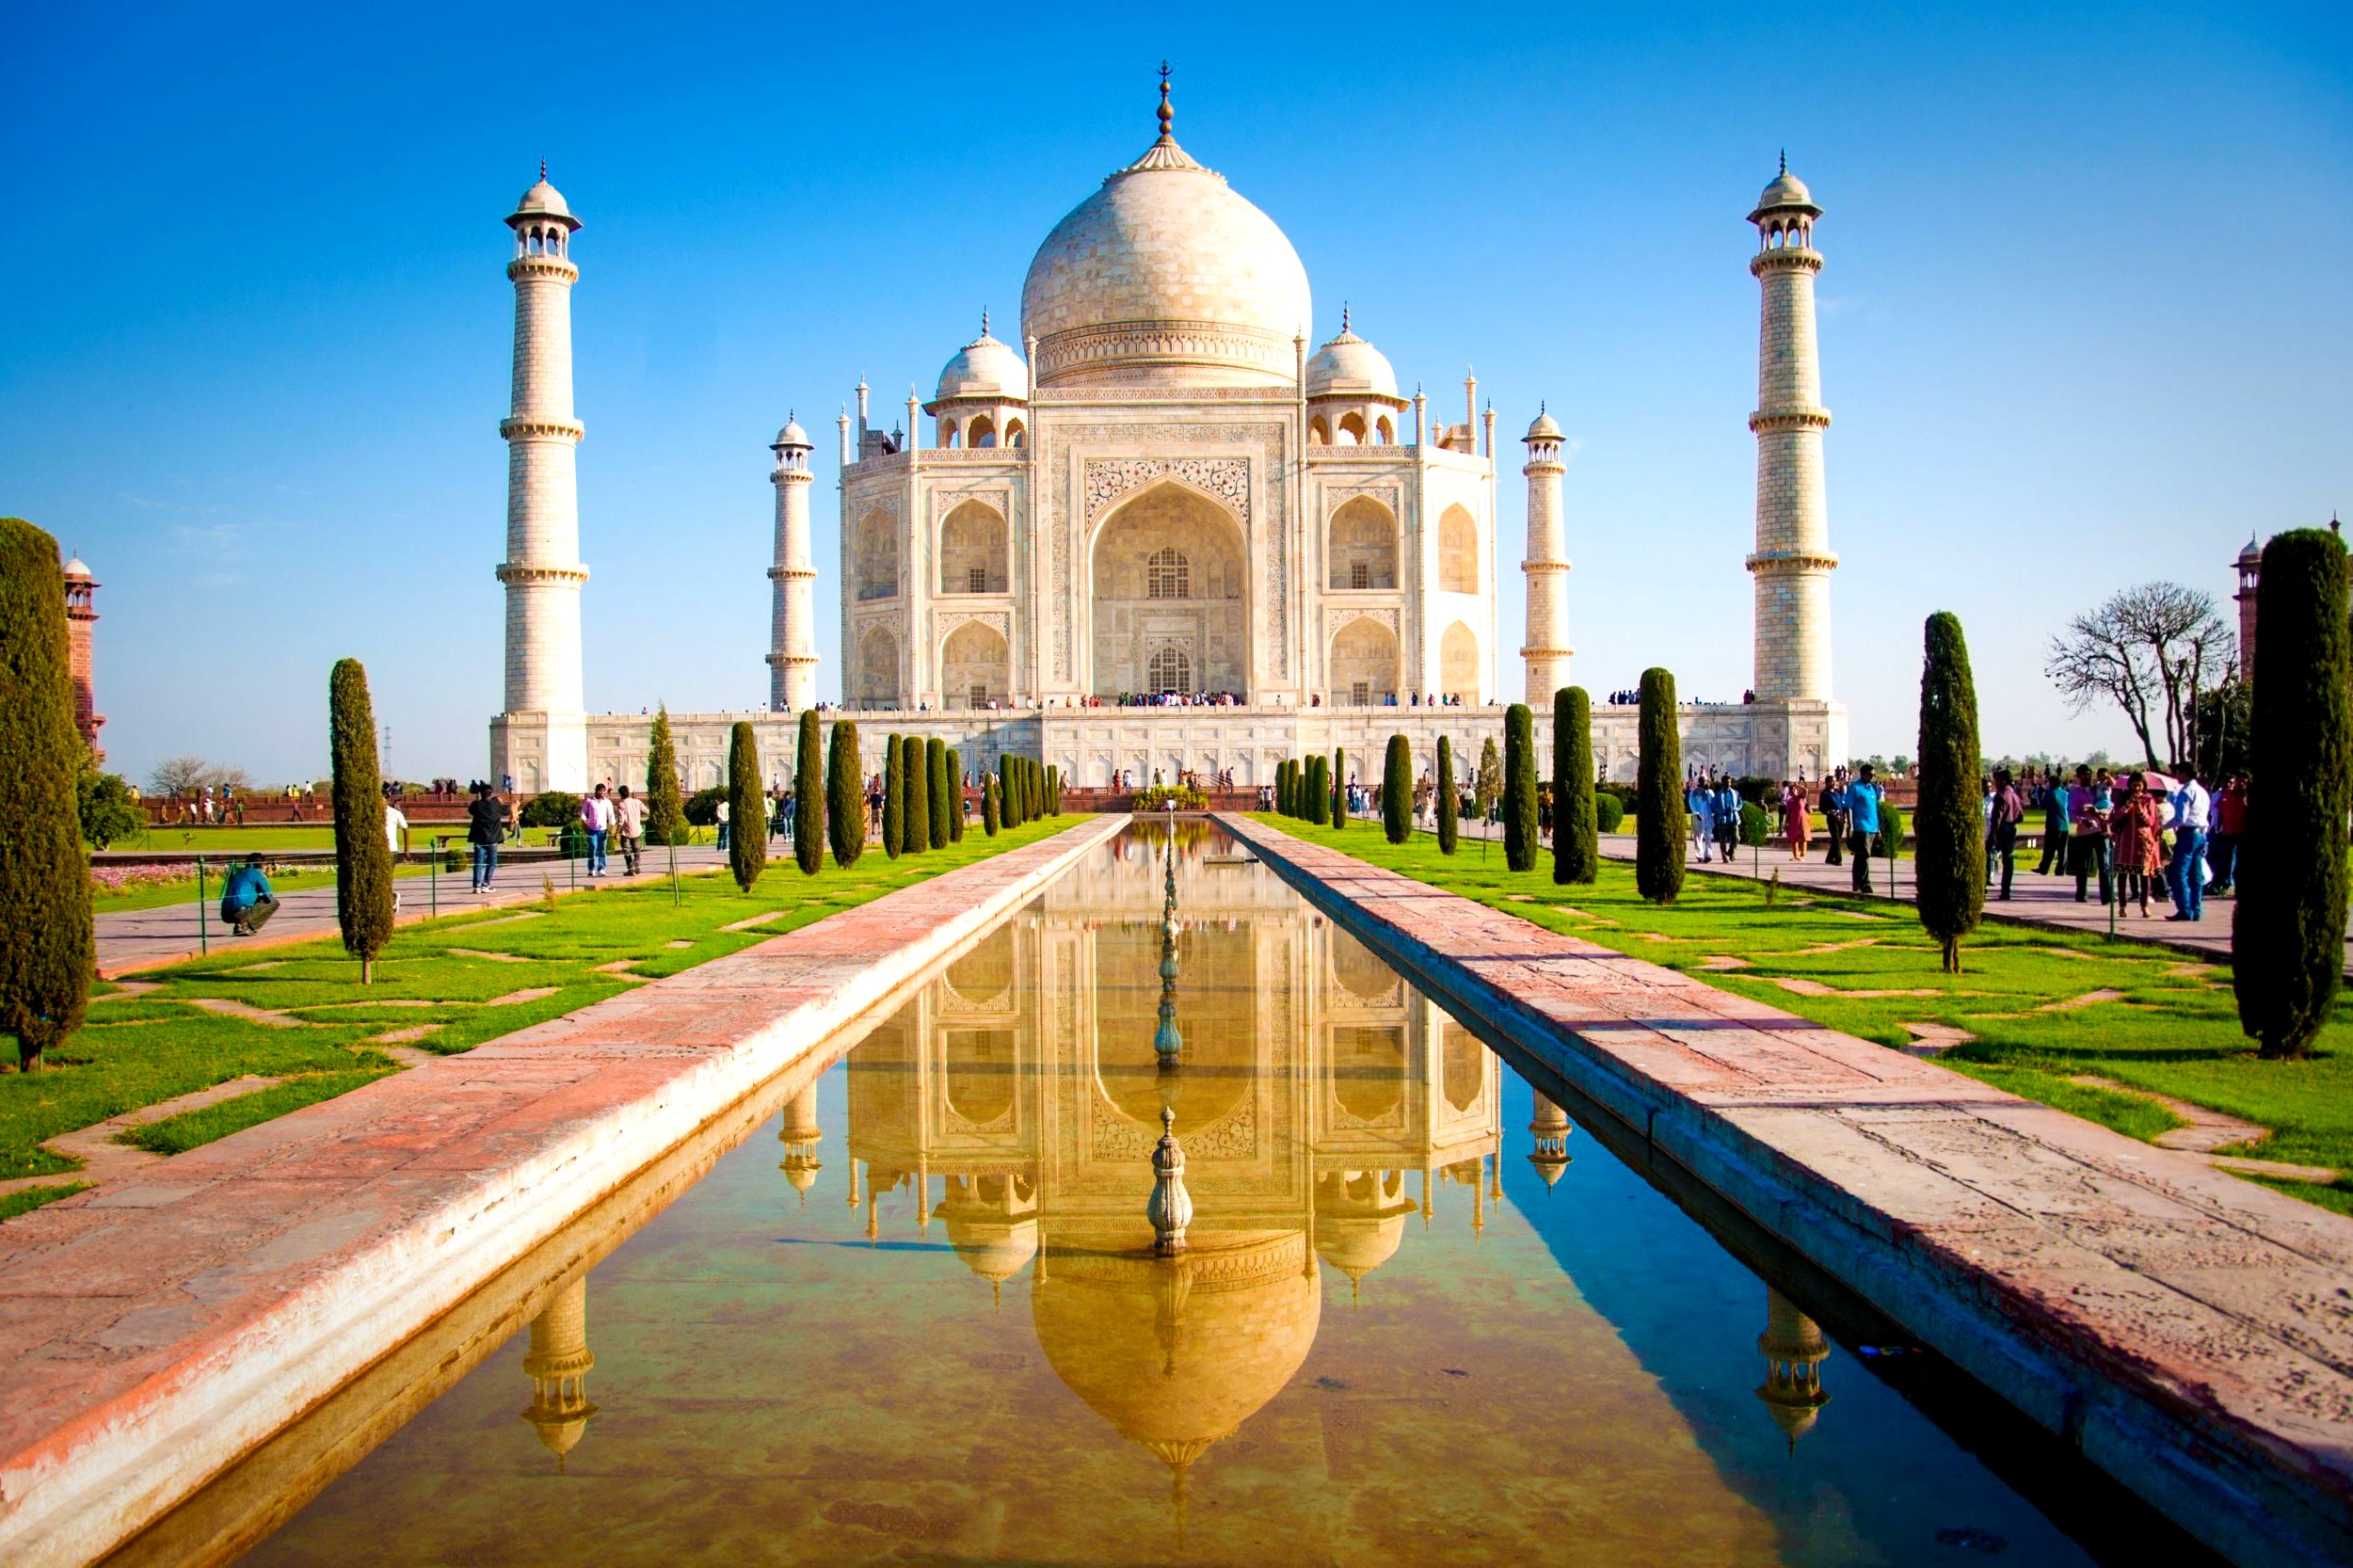 Free tickets at Taj Mahal: Over 1 lakh tourists visited on the last day of Shah Jahan's Urs